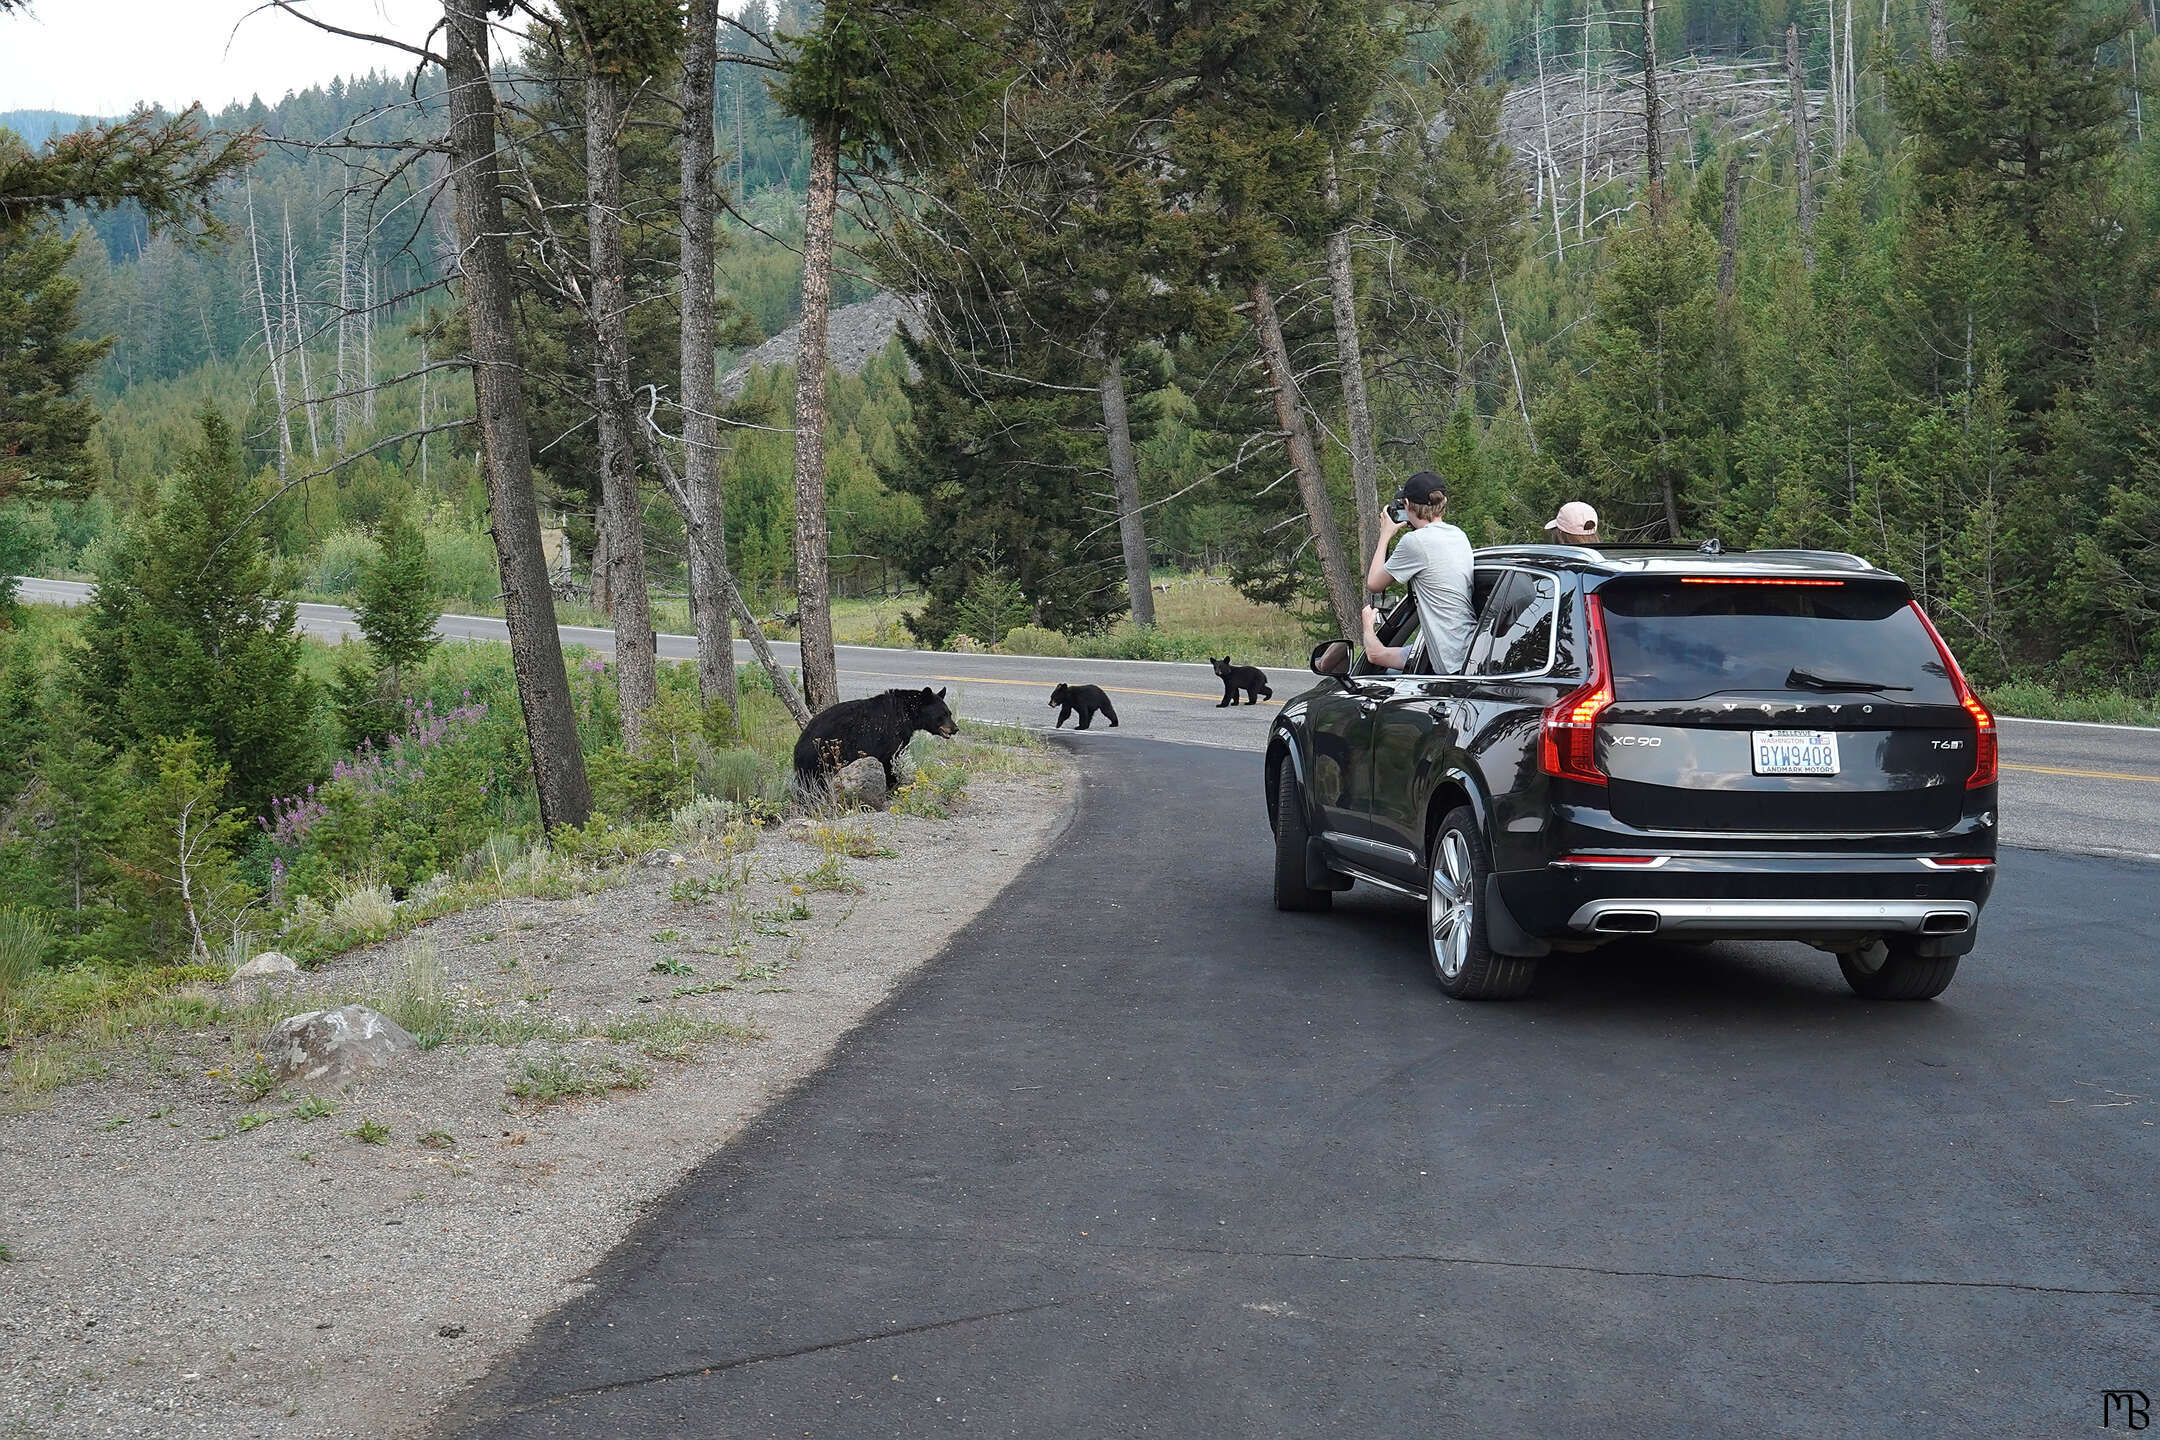 A black bear and cubs on the road